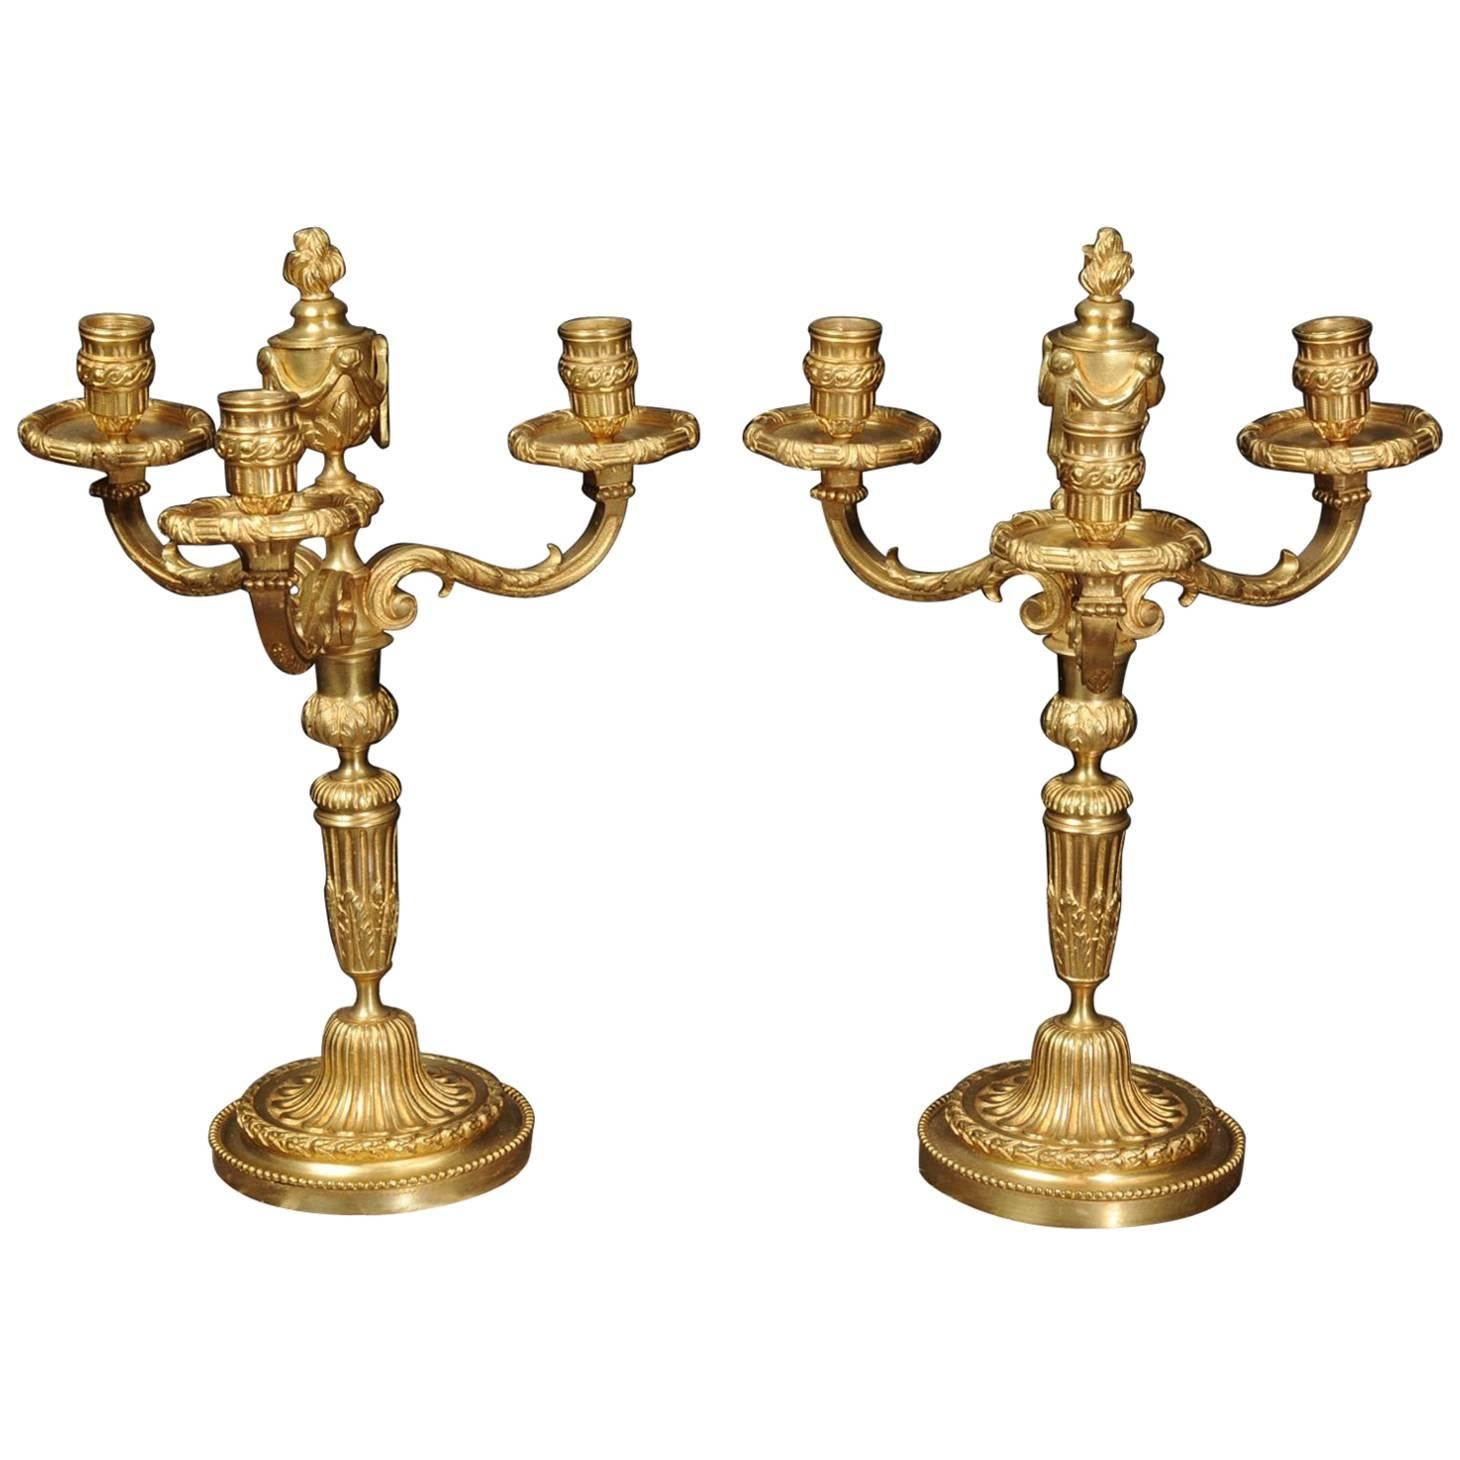 Antique French Pair of Gilt Bronze Neoclassical Candelabra